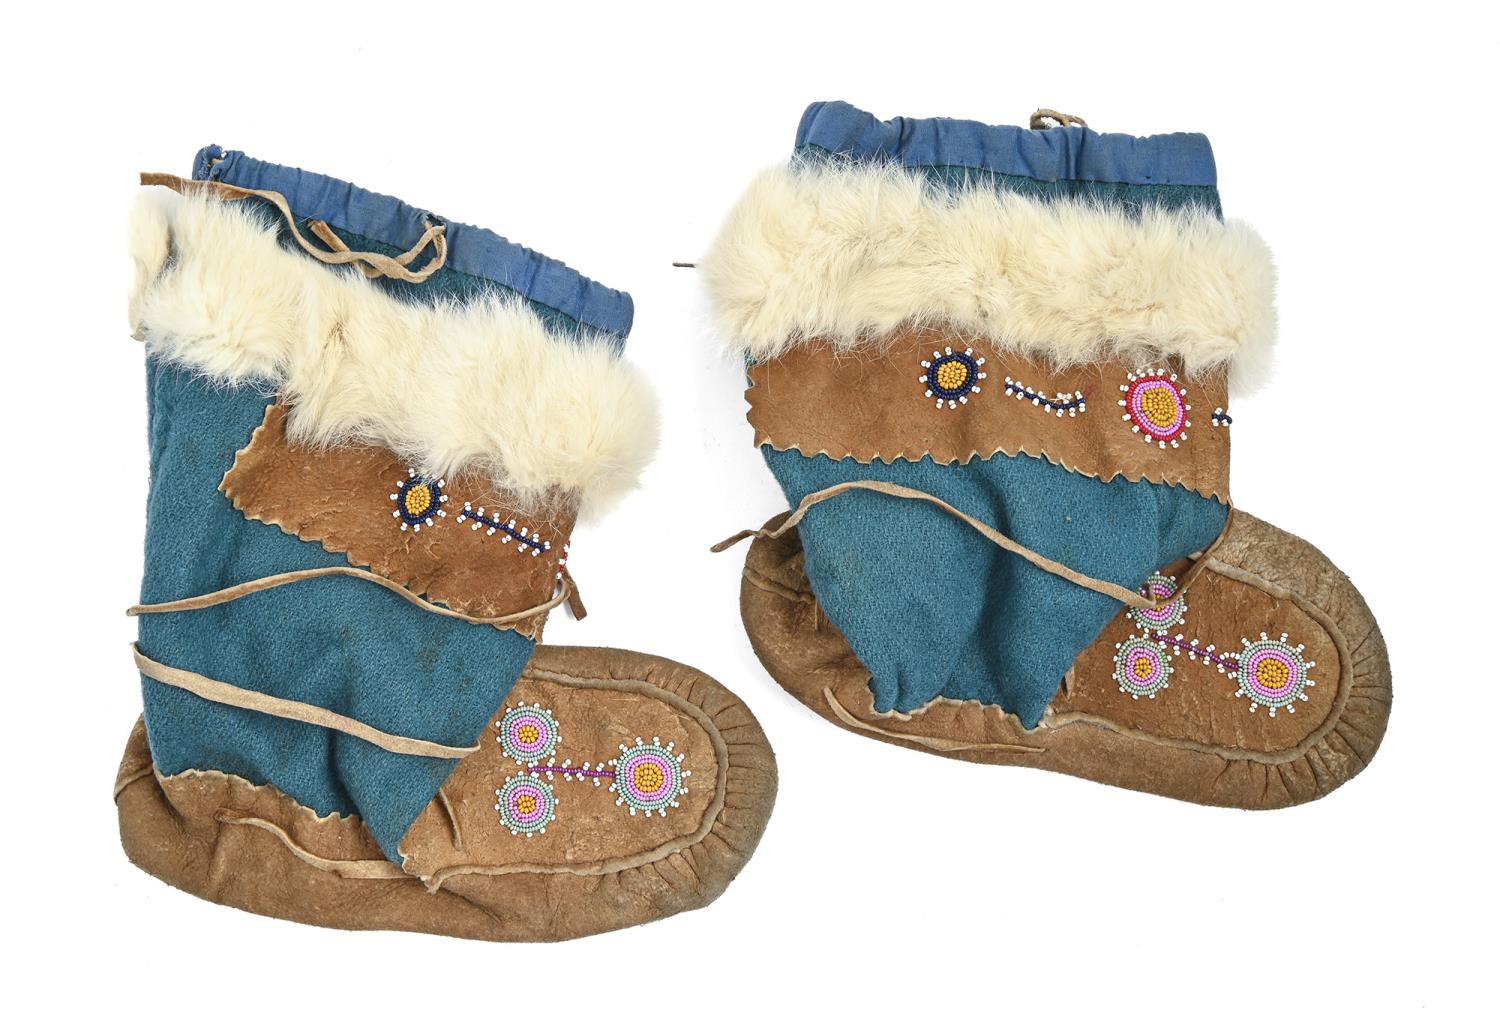 Tribal Art. A pair of native American  leather and beadwork moccasins 20th century Good conditioin